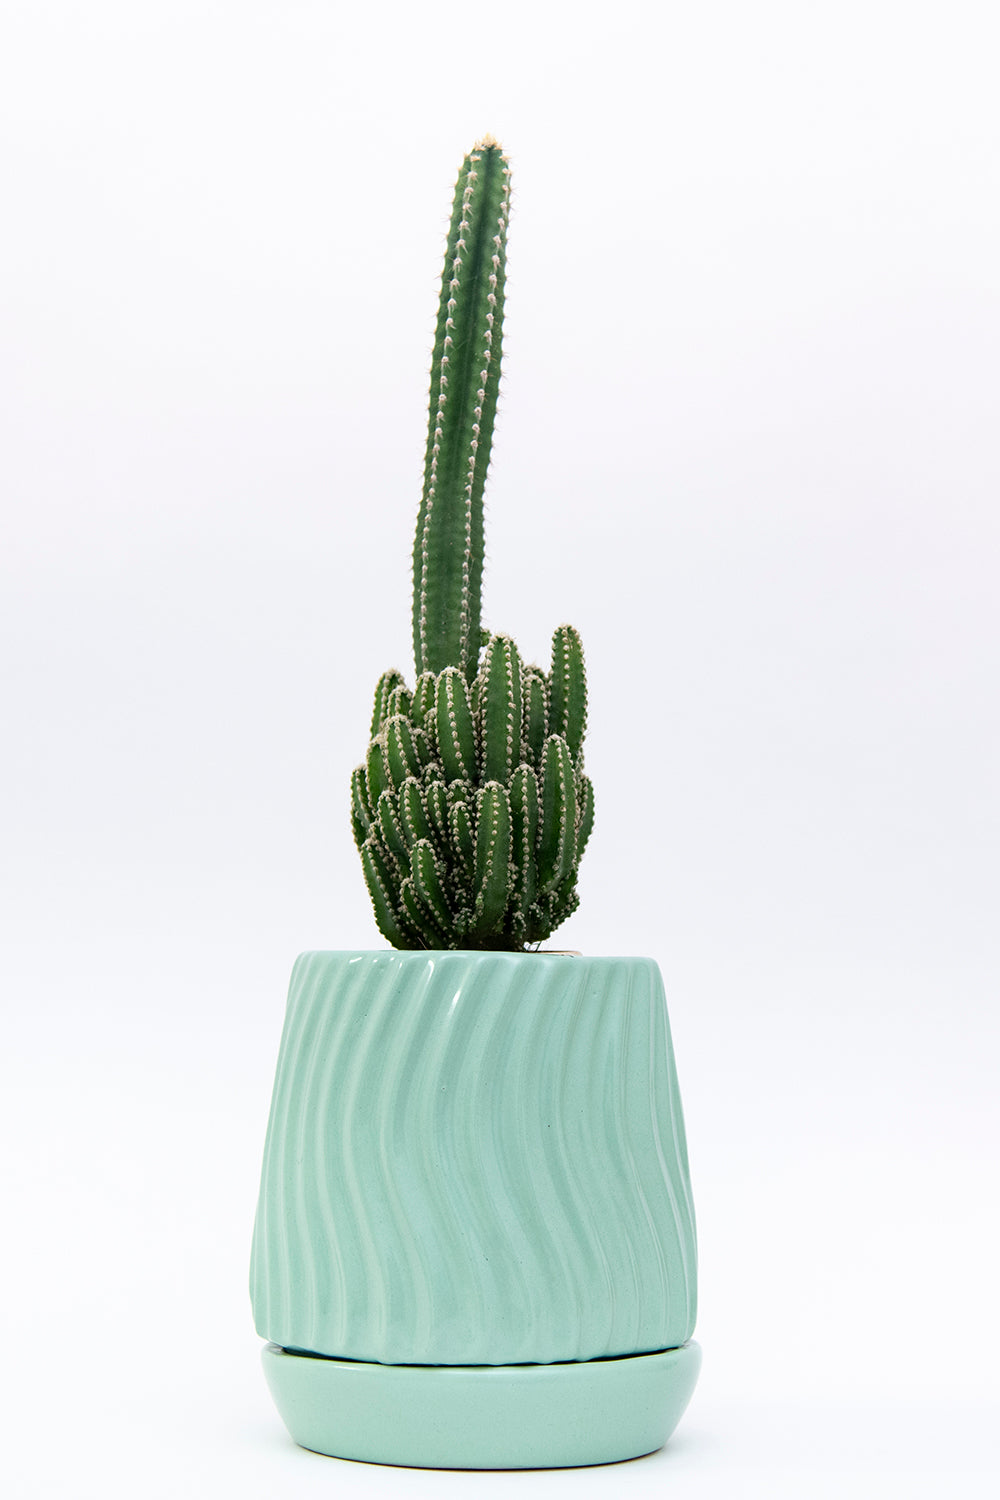 Extra Small size Fallen Angels ceramic tabletop in Sage Green color with Cactus in it.